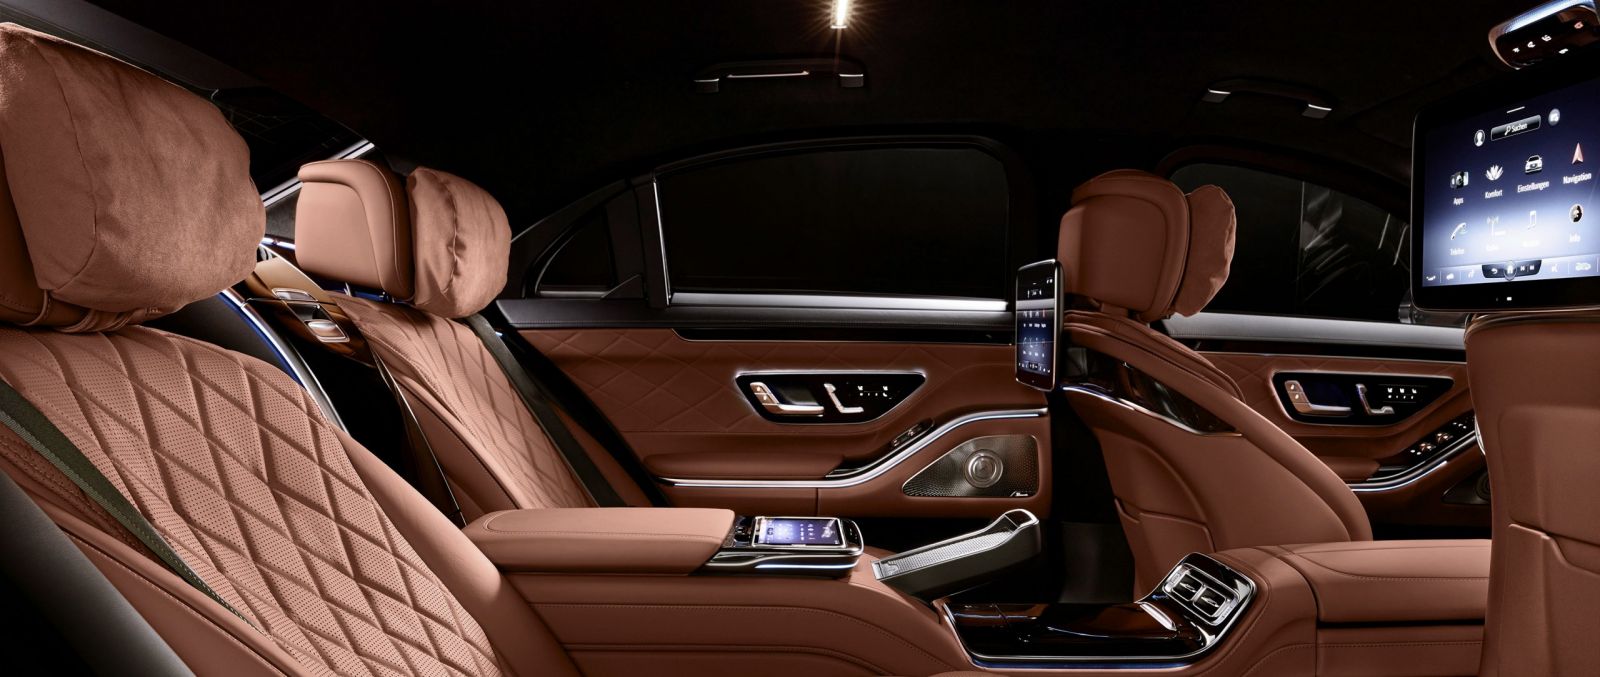 07-mercedes-benz-special-protection-version-of-the-new-s-class-3400x1440.jpeg